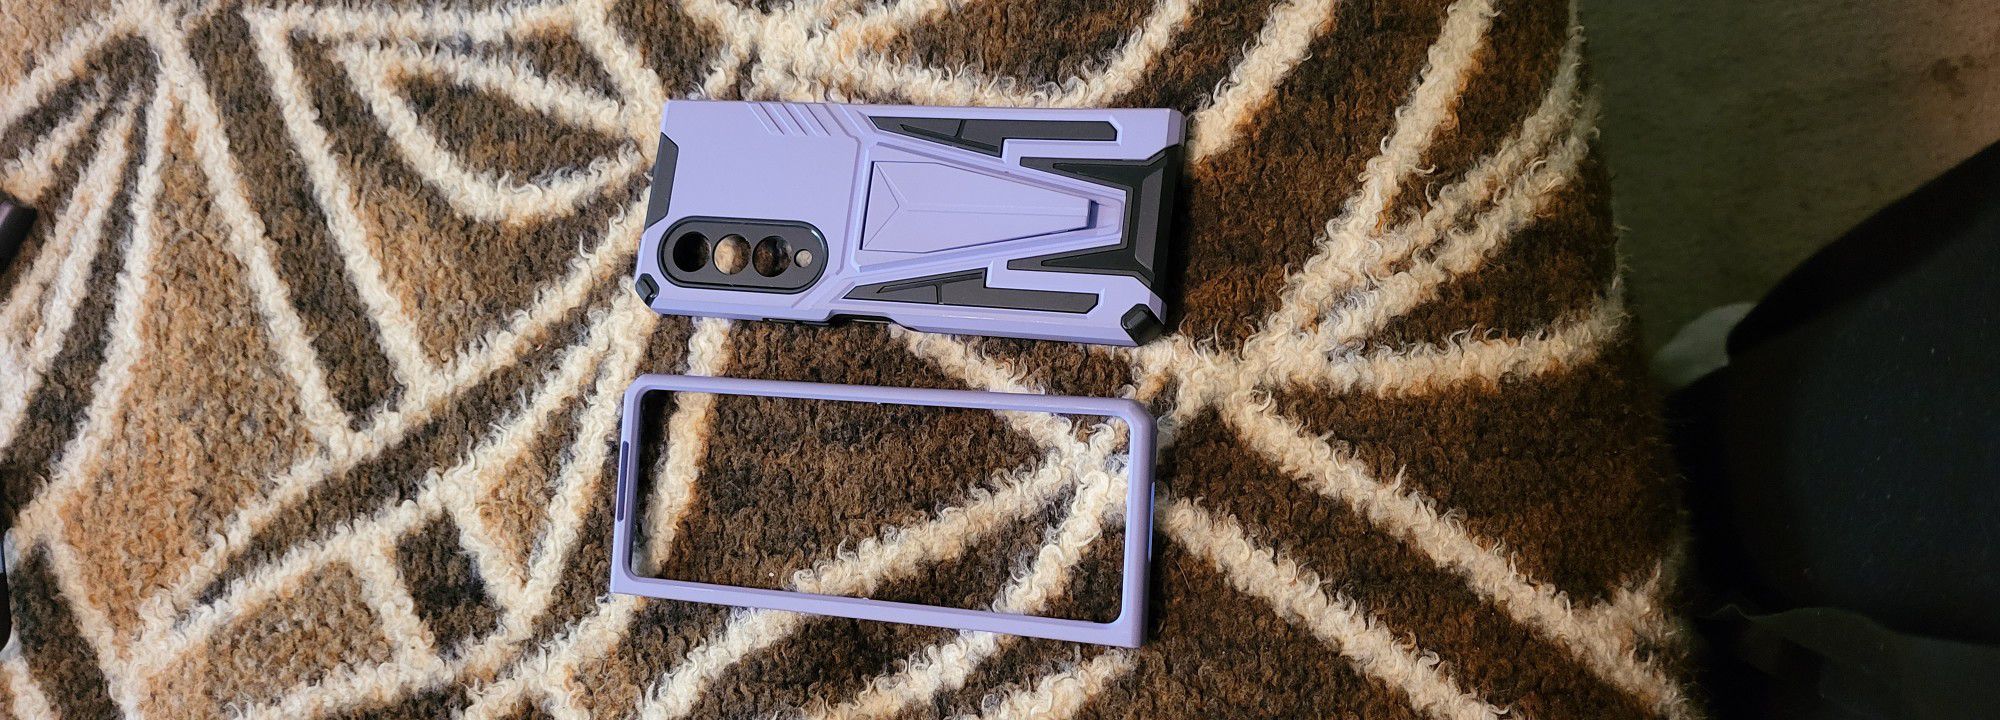 Cell Phone Case fold 3